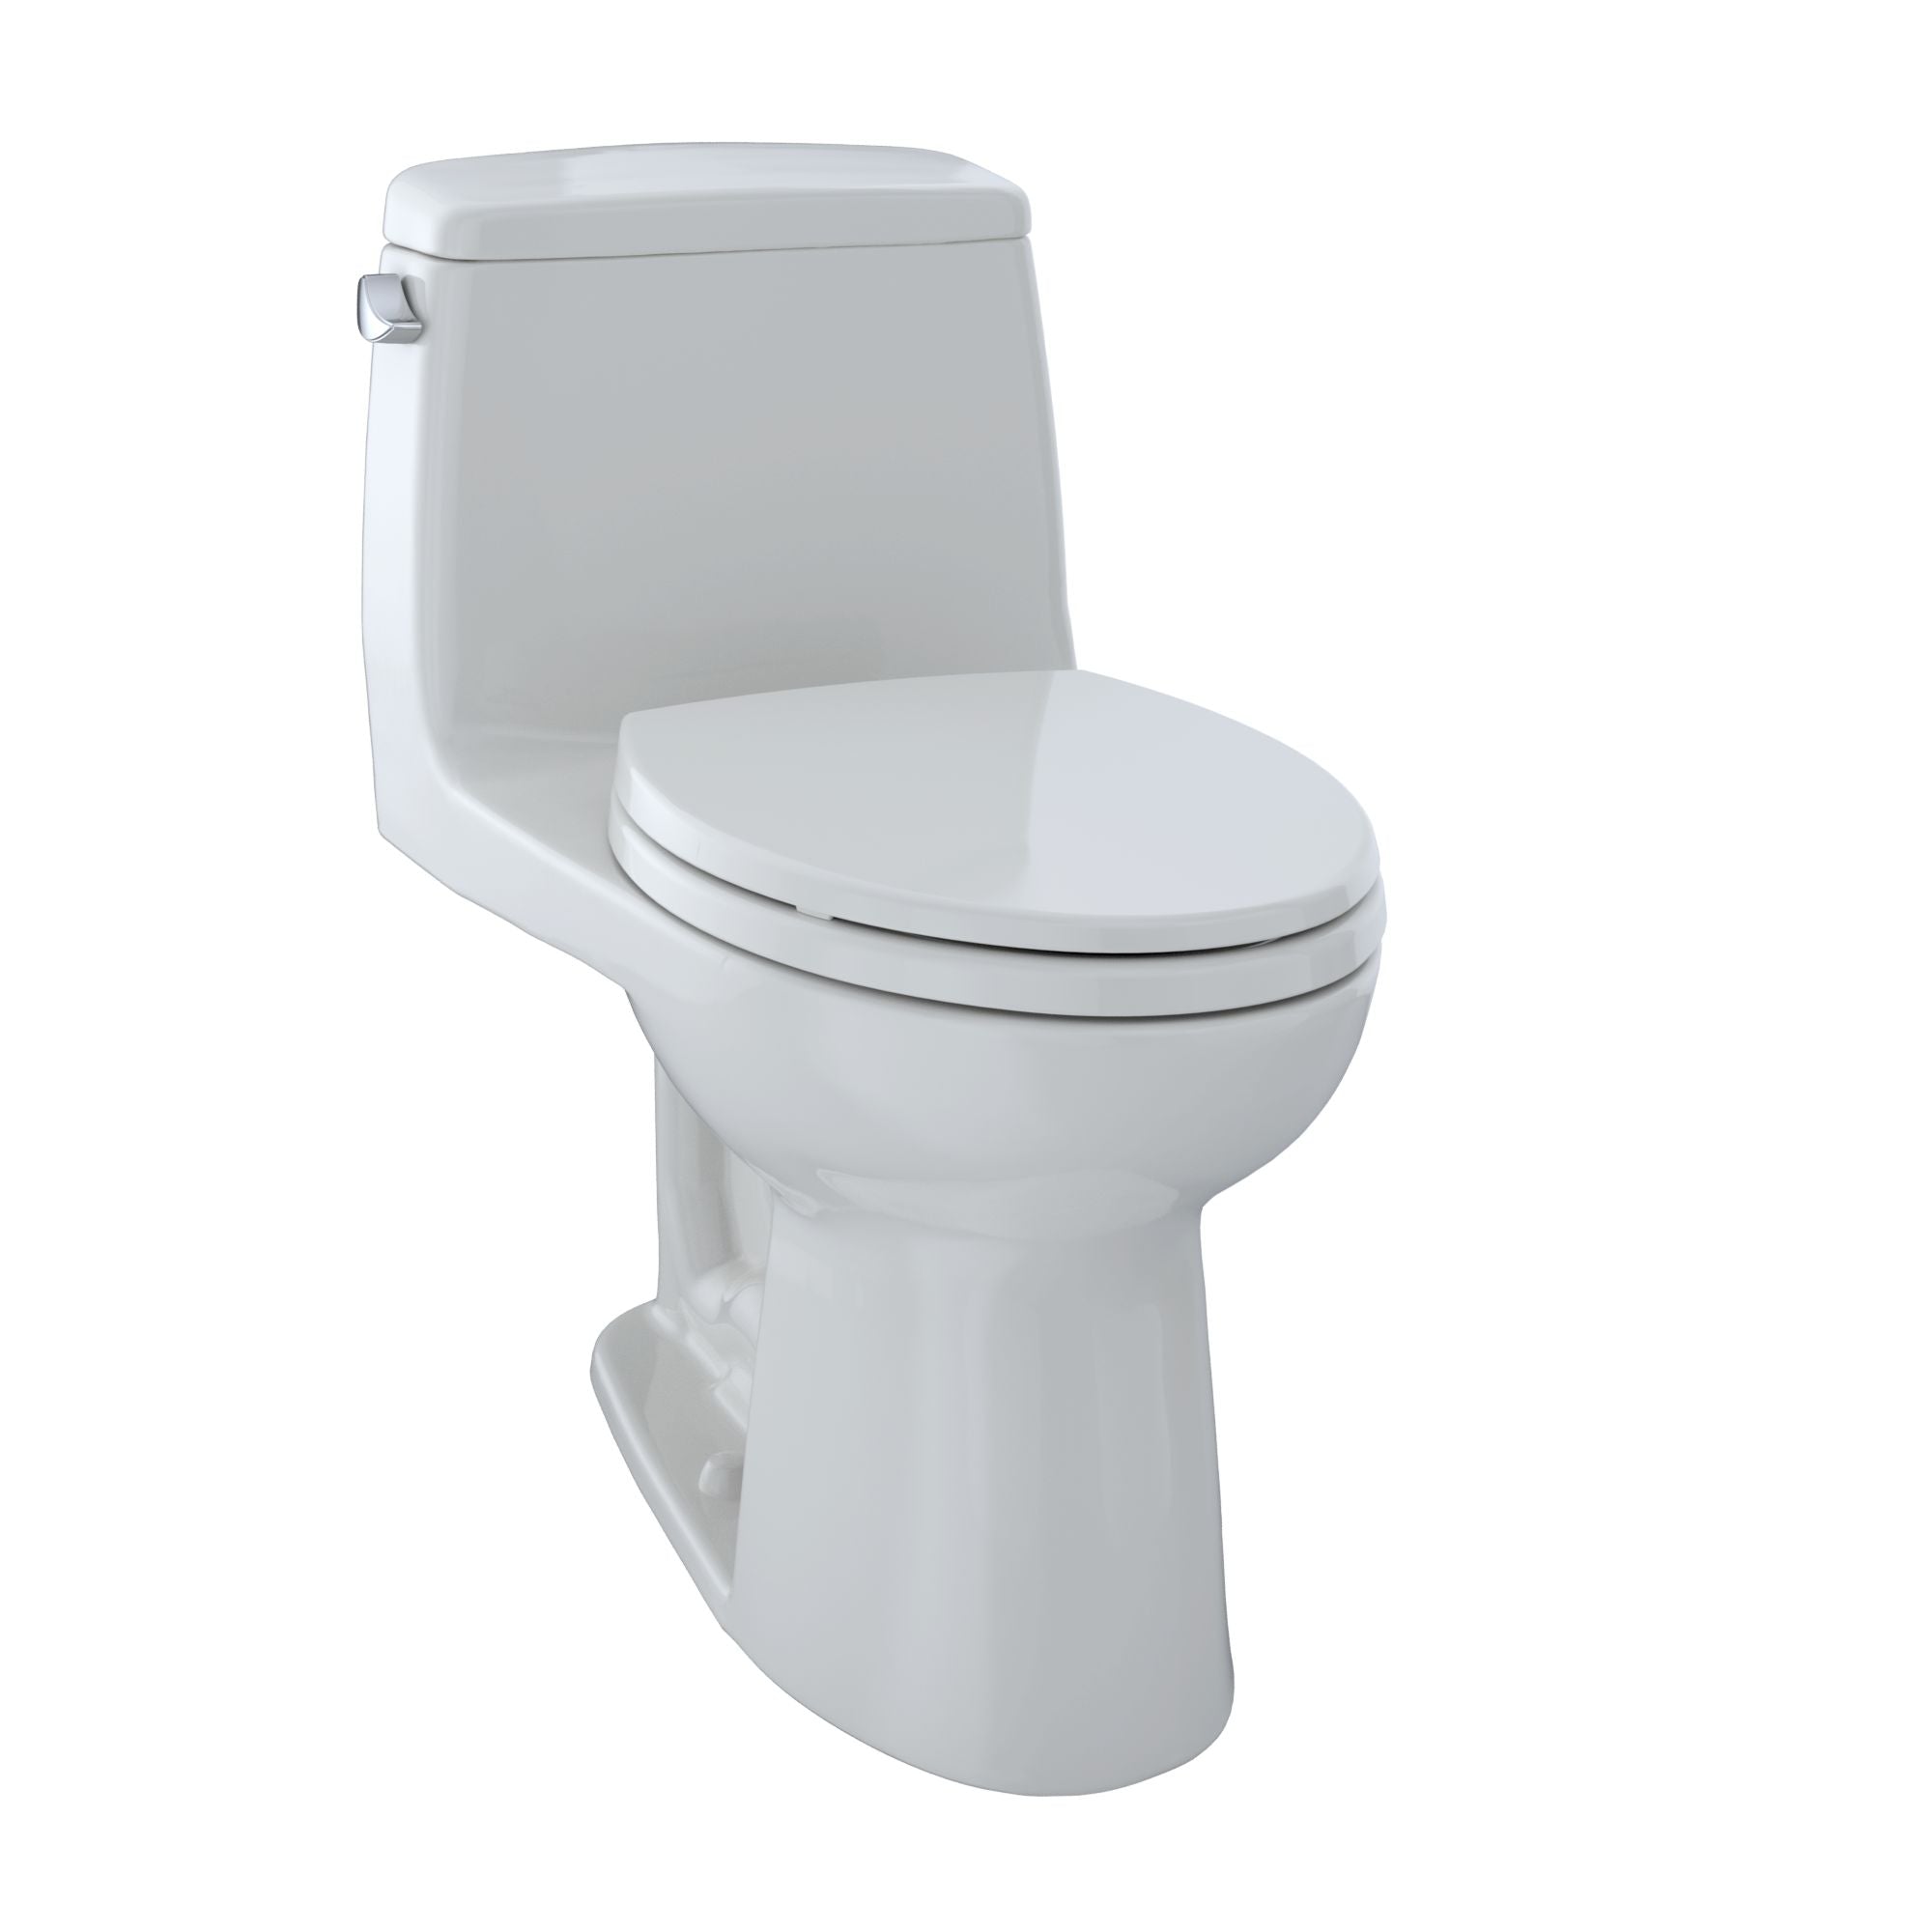 Toto Ultramax One-piece Toilet 1.6 GPF ADA Compliant Elongated Bowl